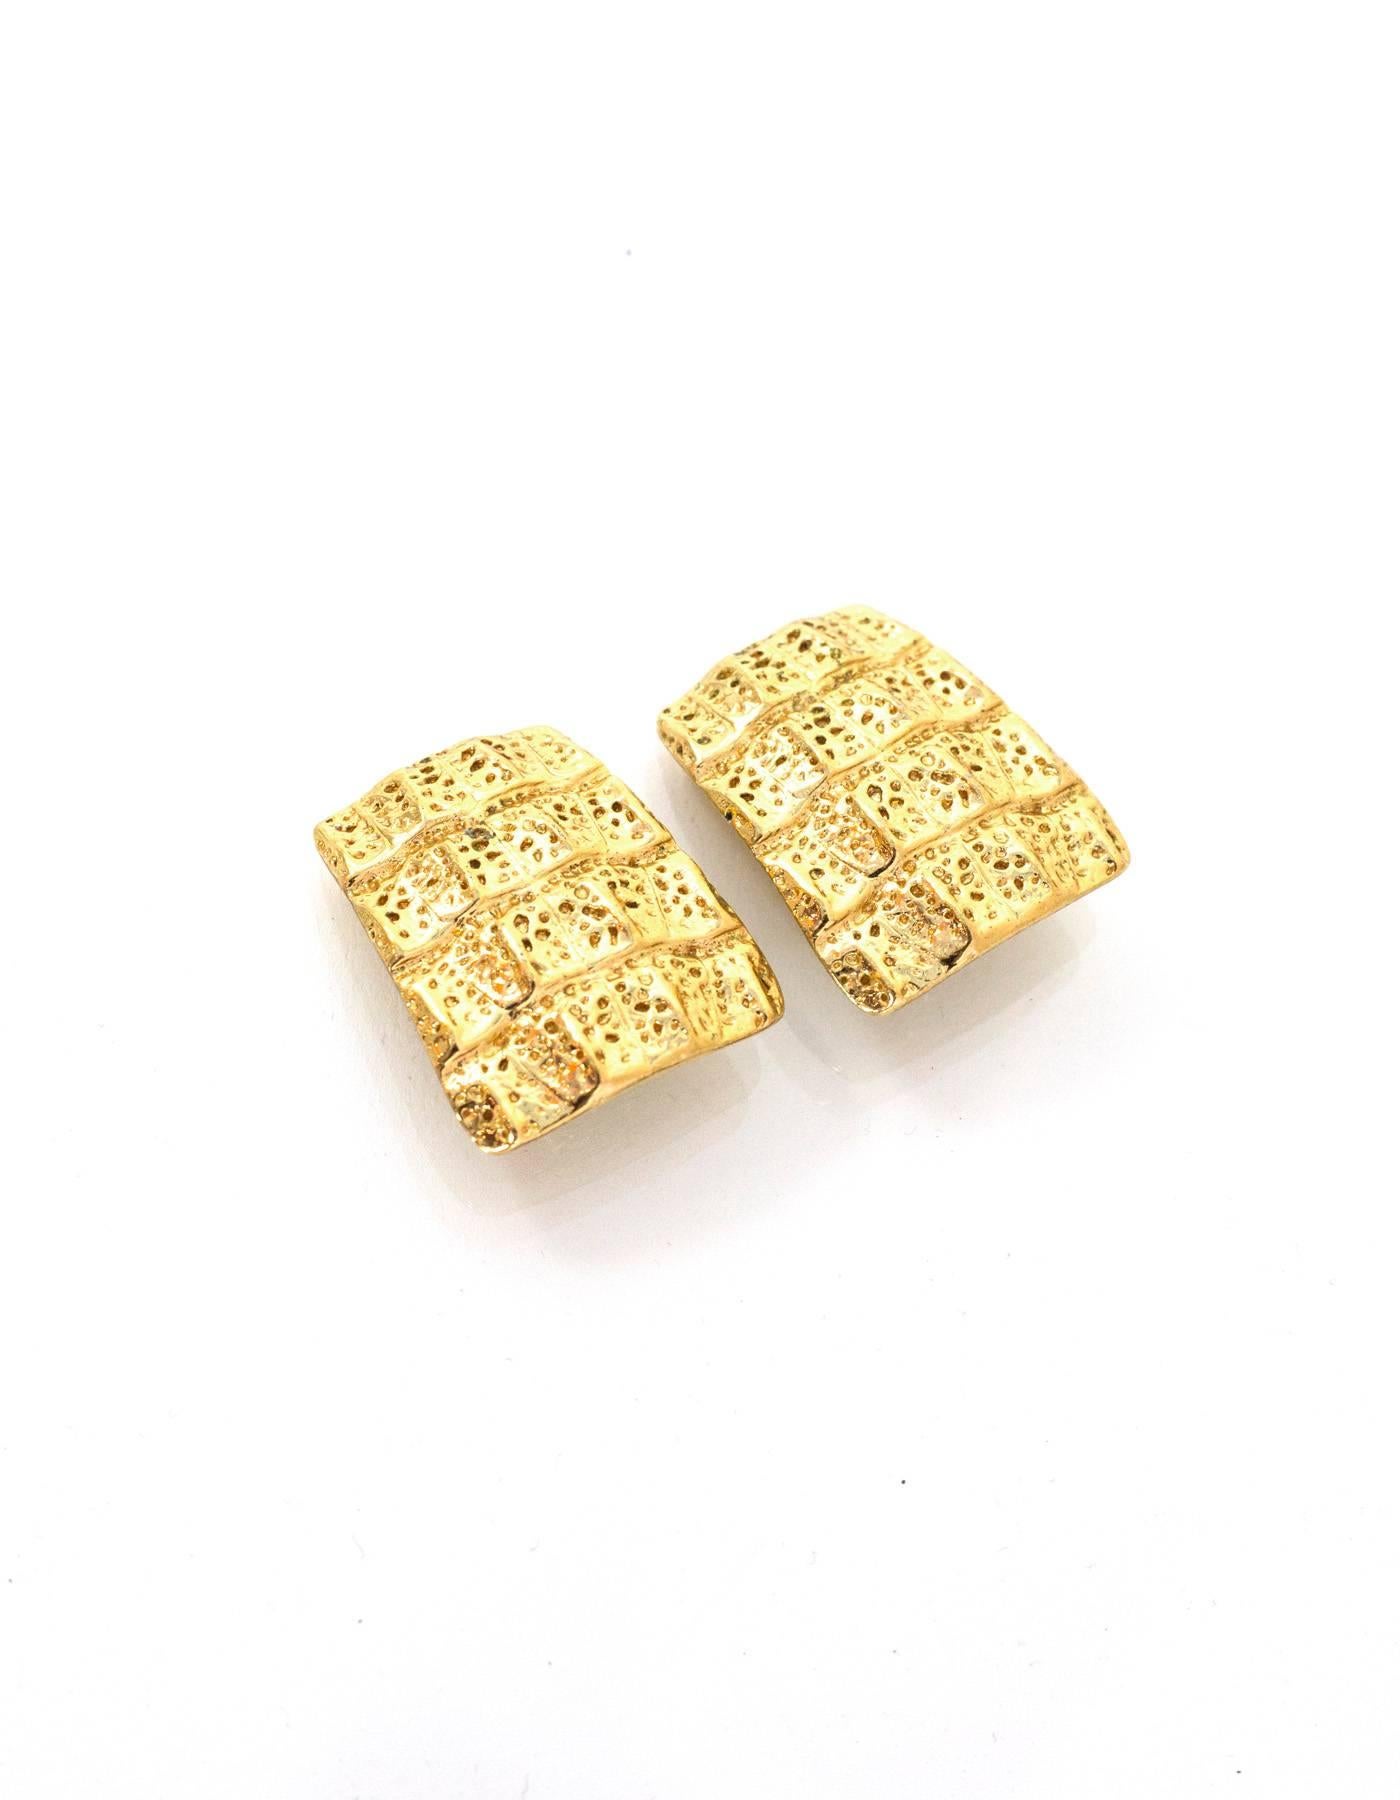 YSL Vintage Gold Rectangle Clip On Earrings 
Features textured details

Made In: France
Year of Production: Cira 1980s
Color: Goldtone
Materials: Metal
Closure: Clip on back
Overall Condition: Excellent vintage, pre-owned condition with the